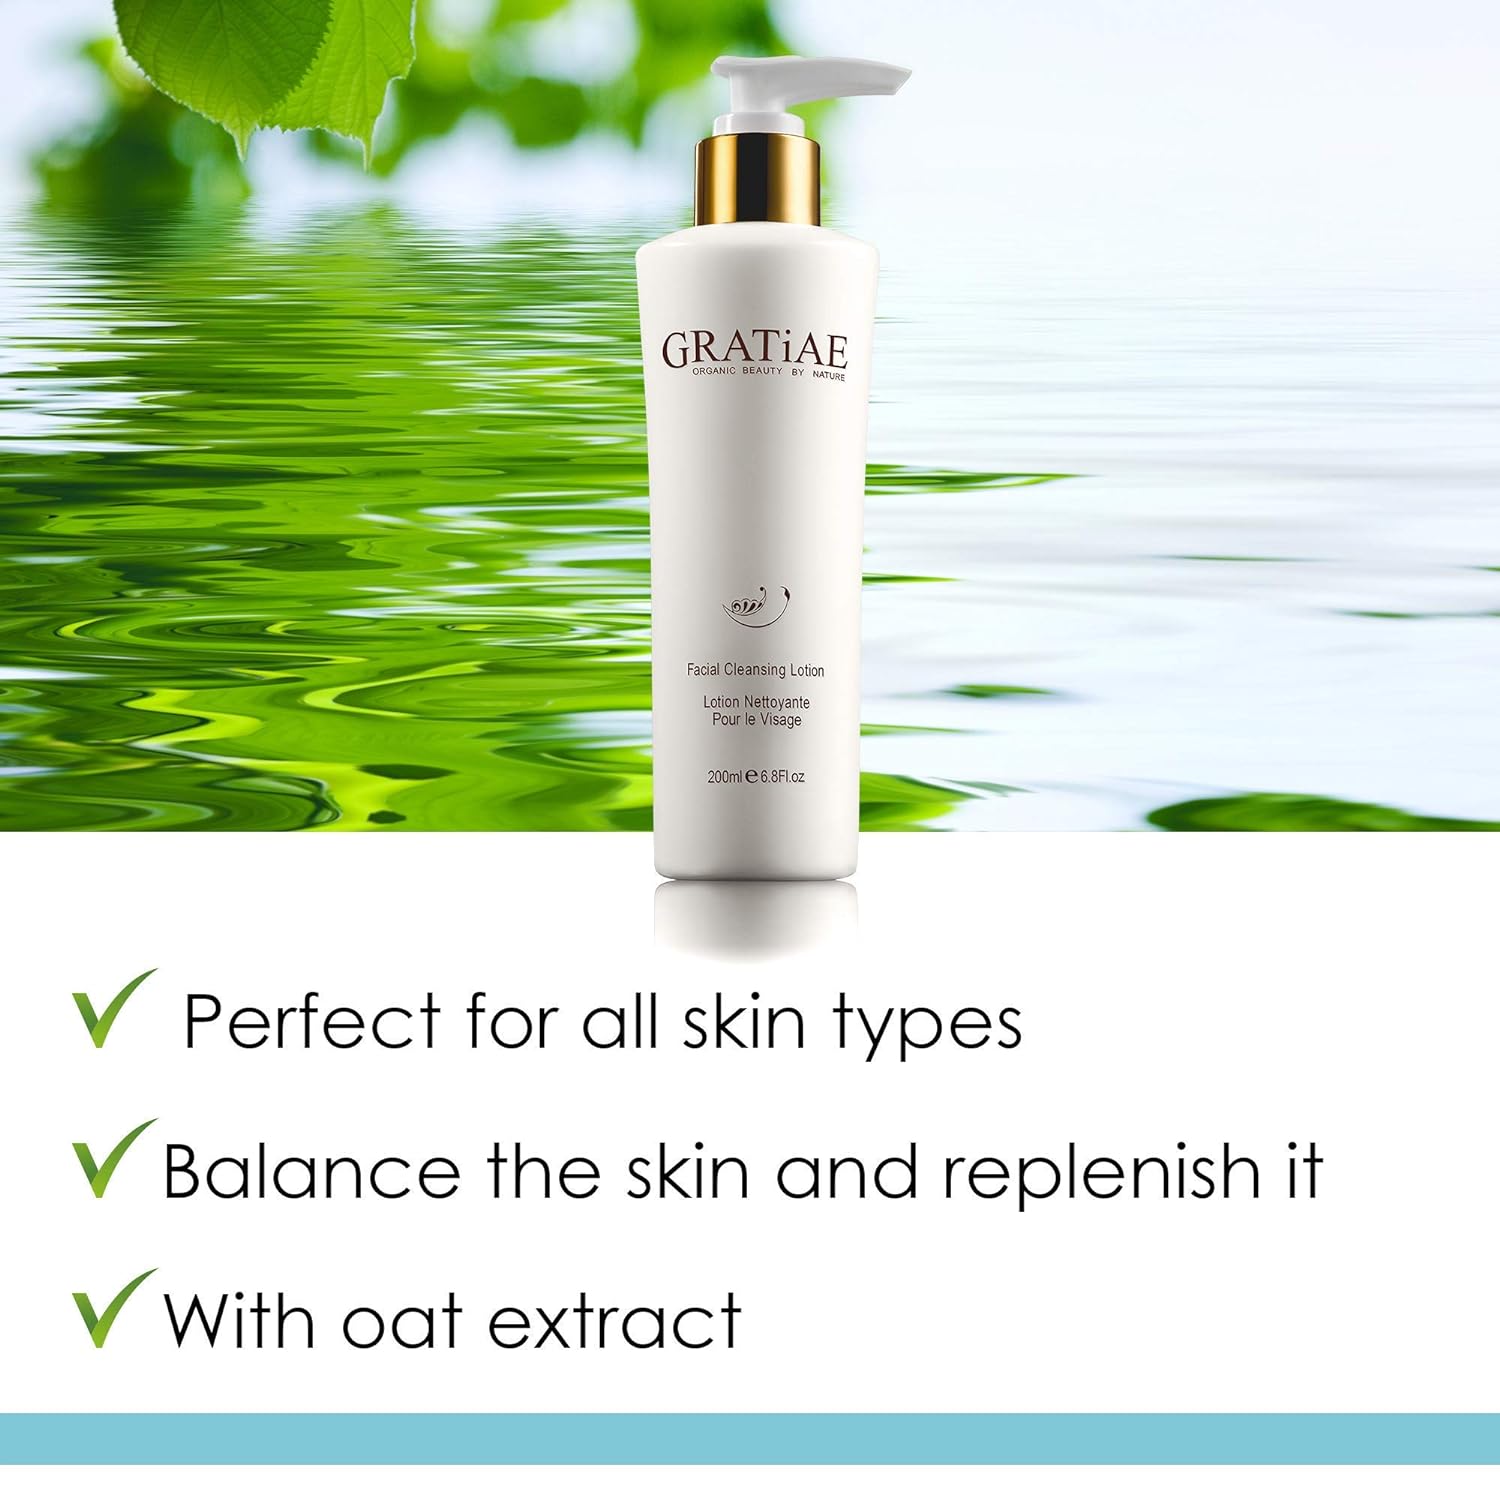 Gratiae Organic facial cleansing lotion, face cleanser, cleansing milk face wash, ultra-hydrating, gentle face cleanser  make-up remover moisturizing hydrating gentle, non-drying deep clean 6.8fl oz